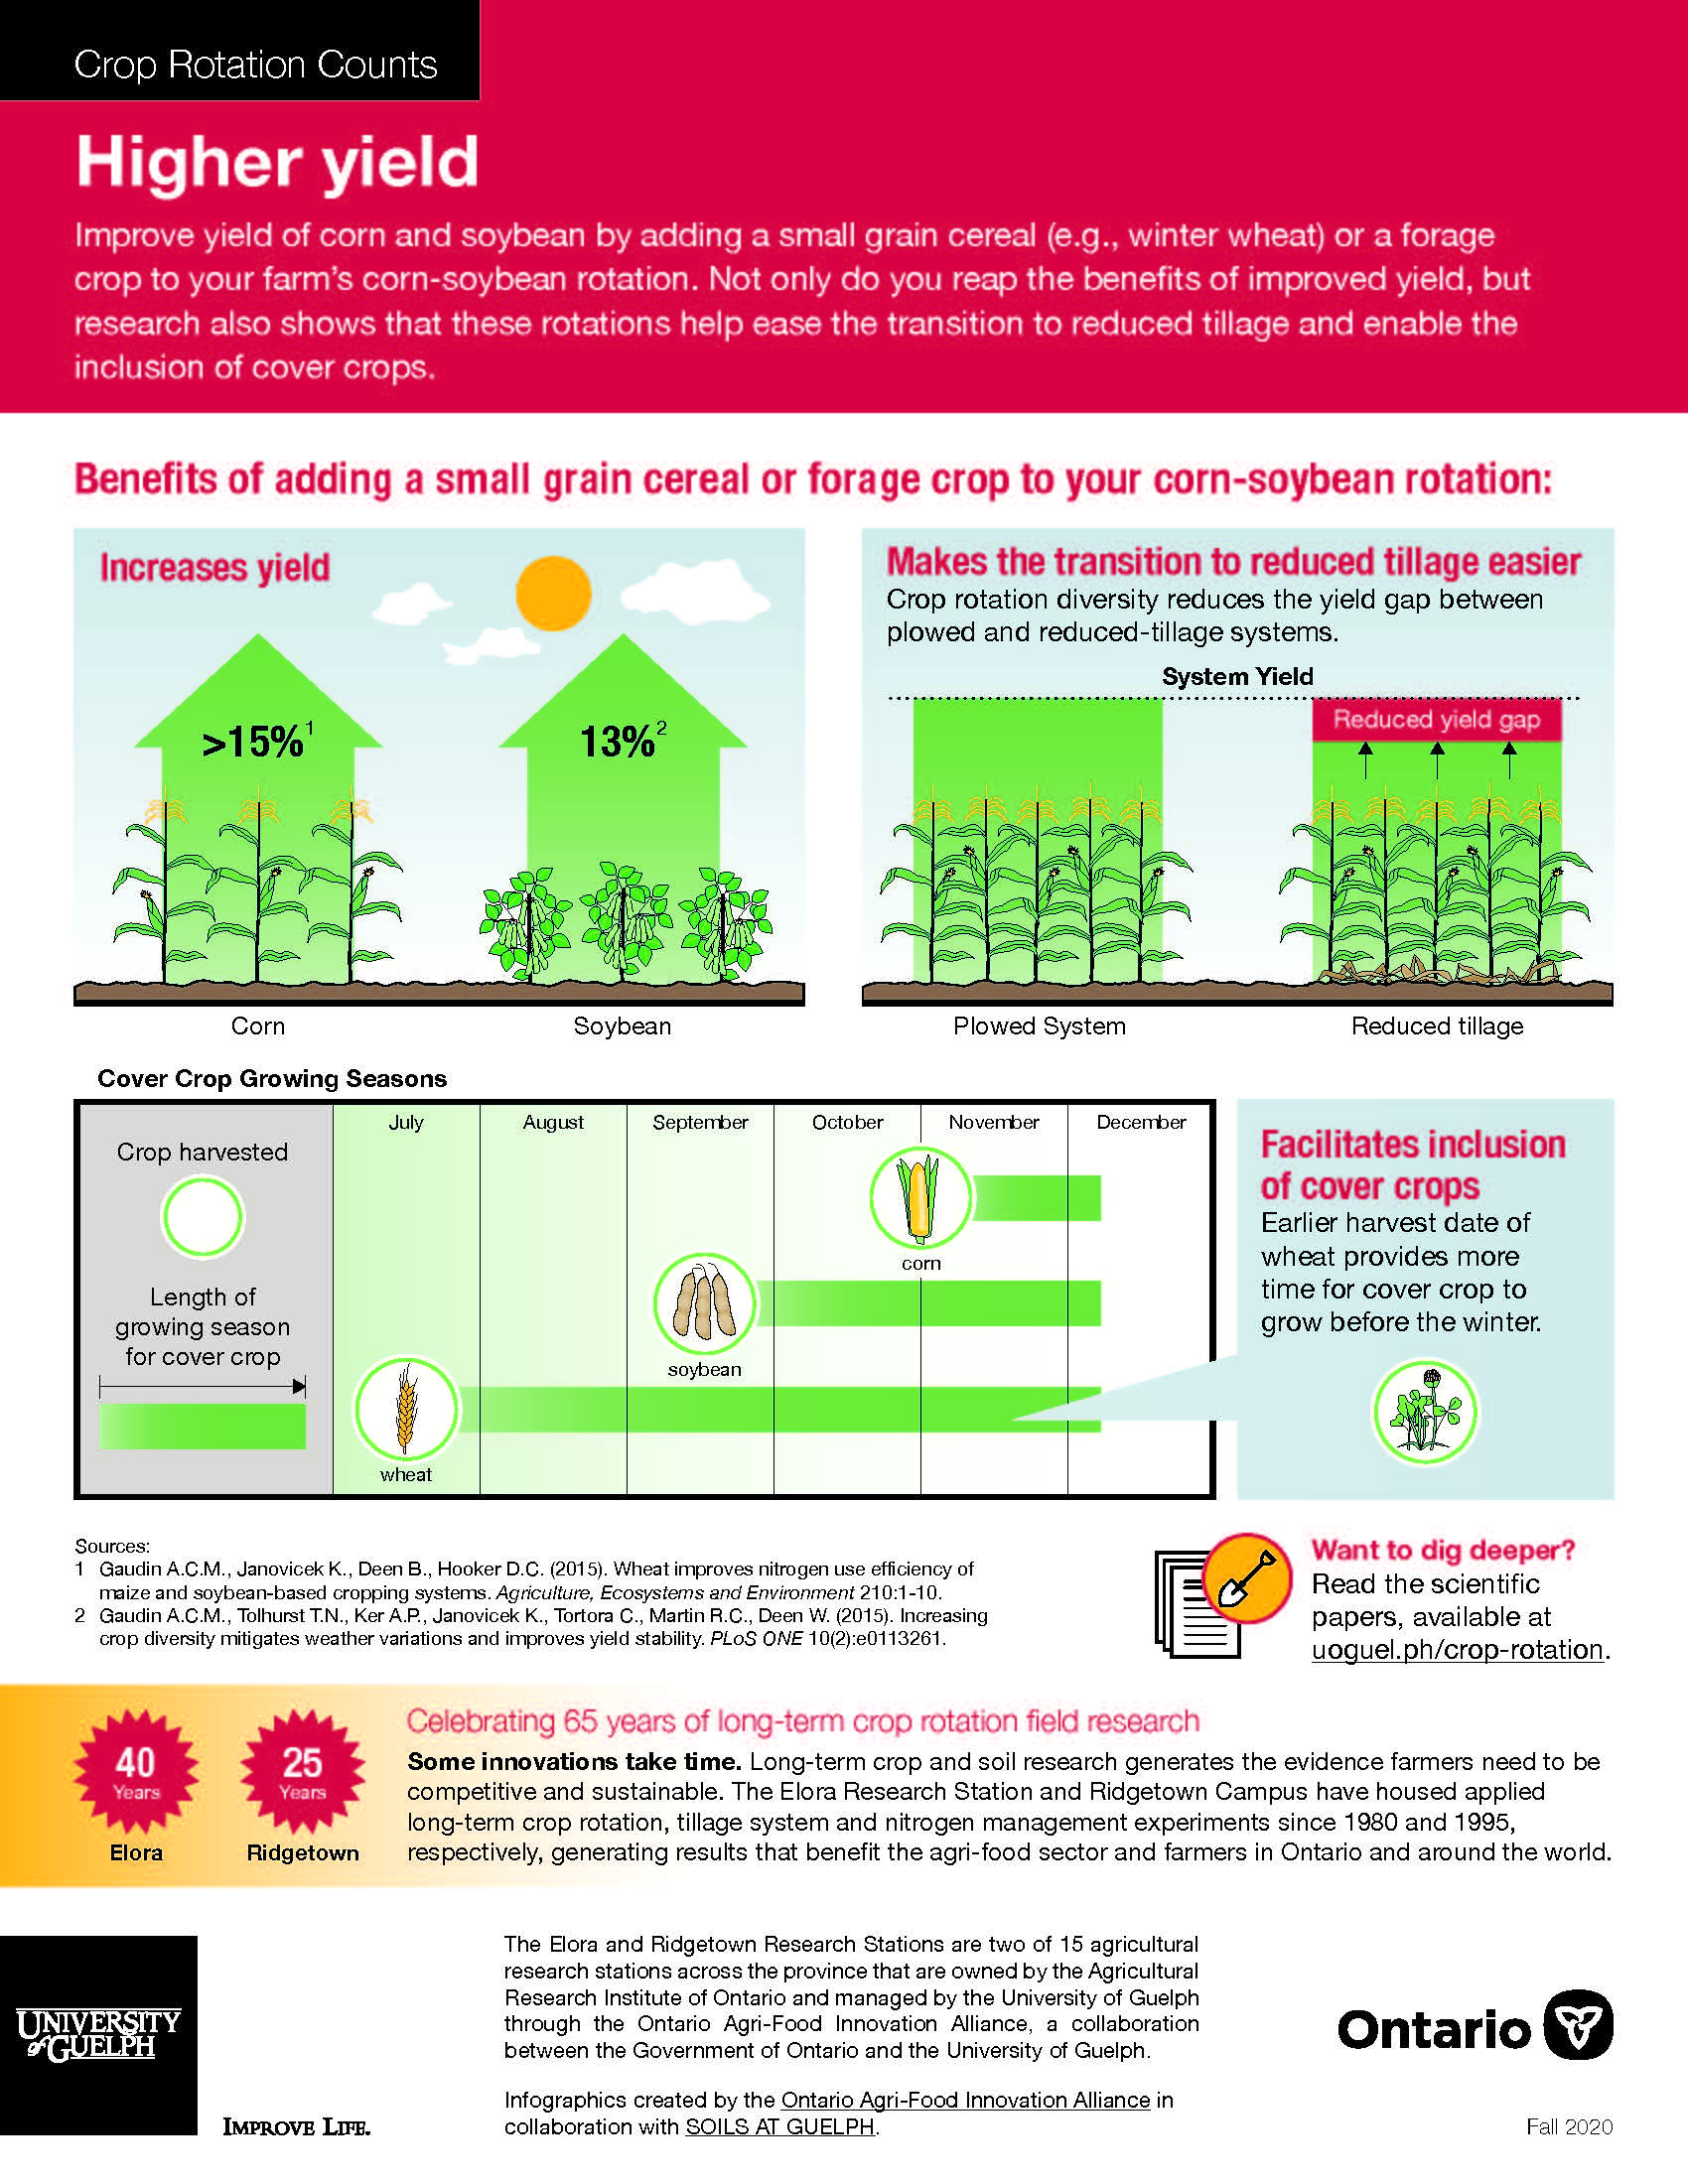 Crop rotation counts infographic: Higher yields. Text version follows.